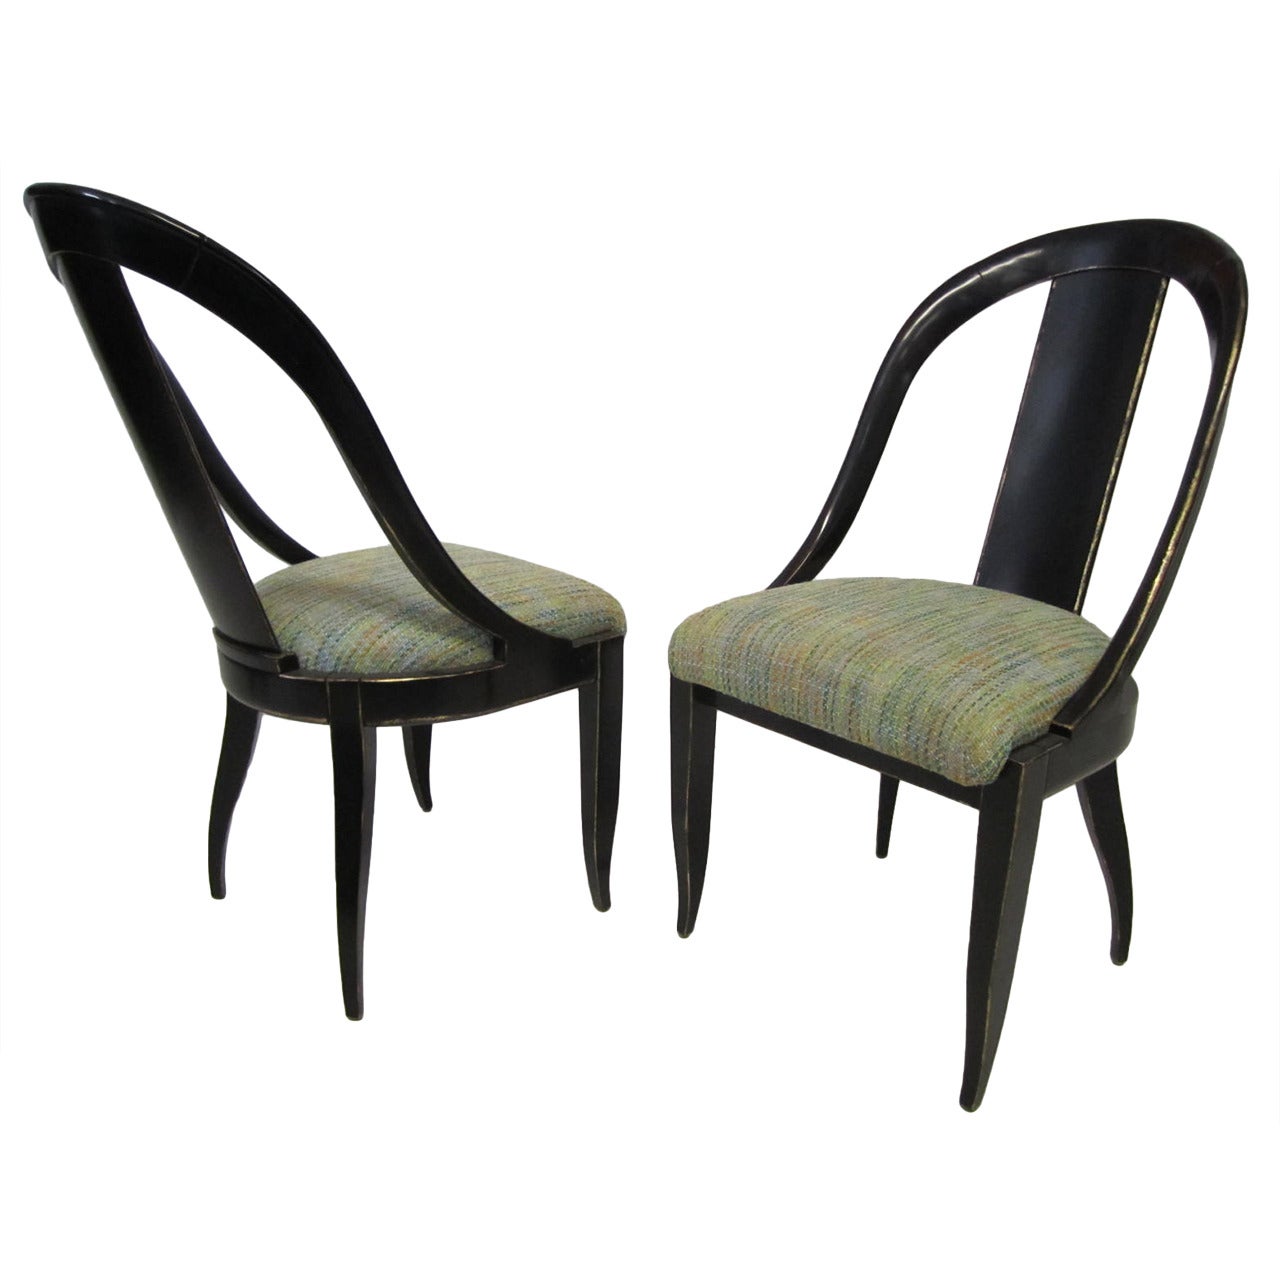 Sensuous Pair of Swaim Spoon Back Lacquered Side Chairs, Mid-Century Modern For Sale